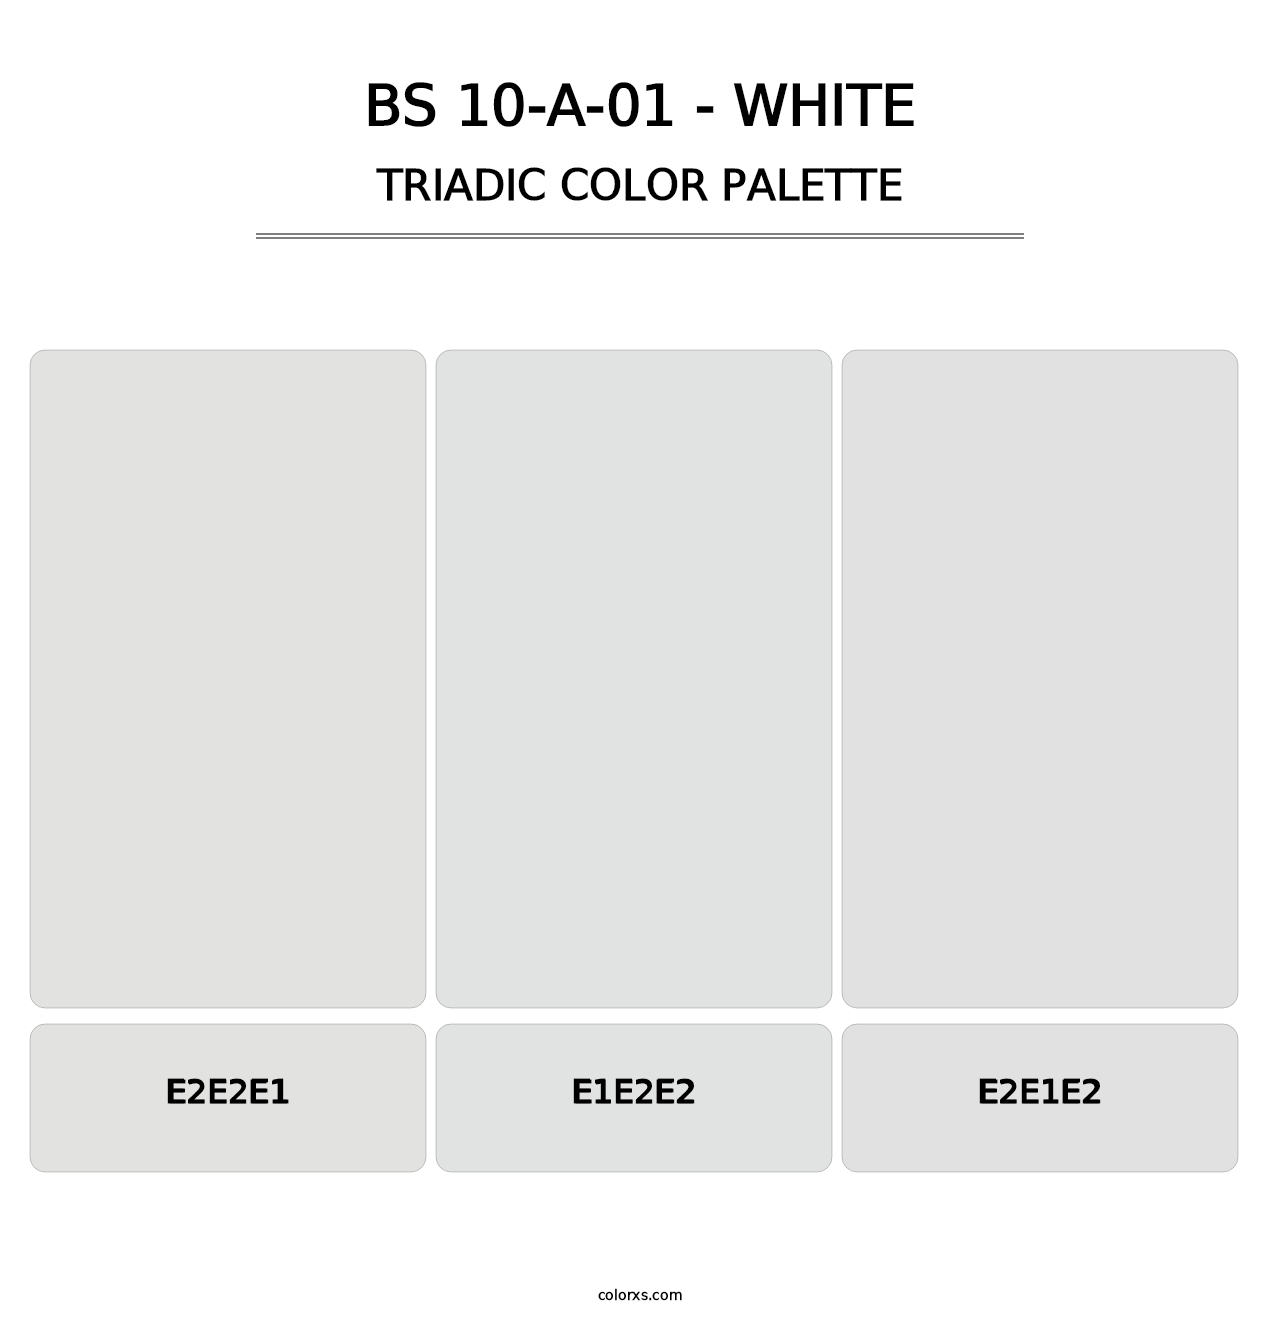 BS 10-A-01 - White - Triadic Color Palette